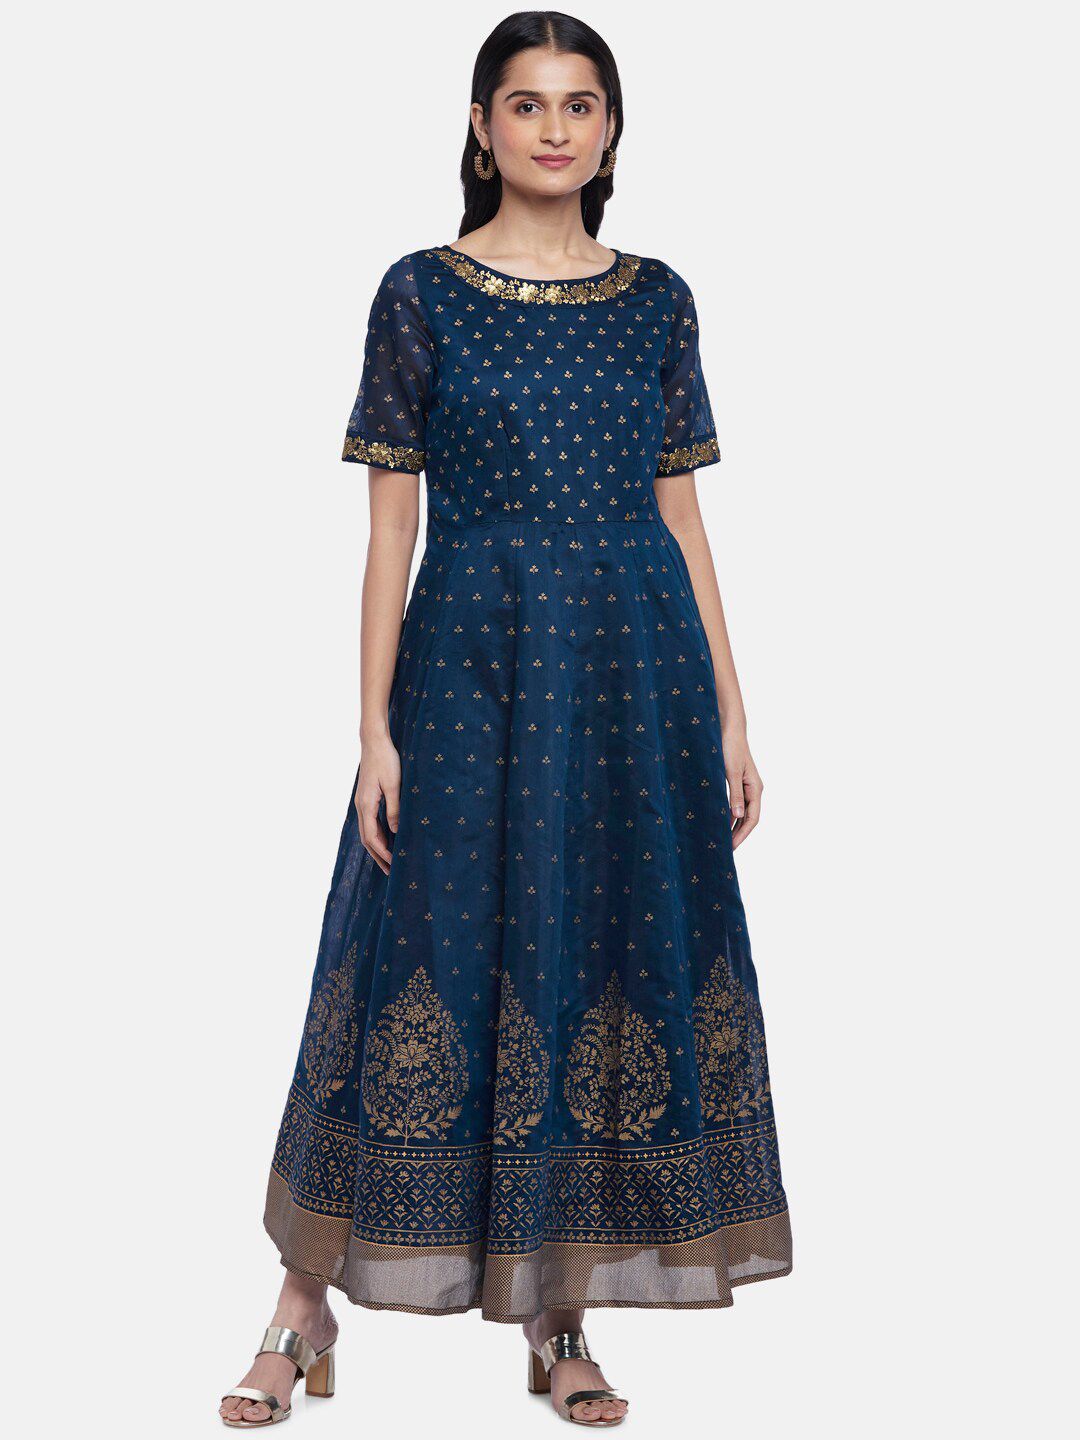 RANGMANCH BY PANTALOONS Women Blue Ethnic Motifs Print Sequins Embroidered Maxi Dress Price in India